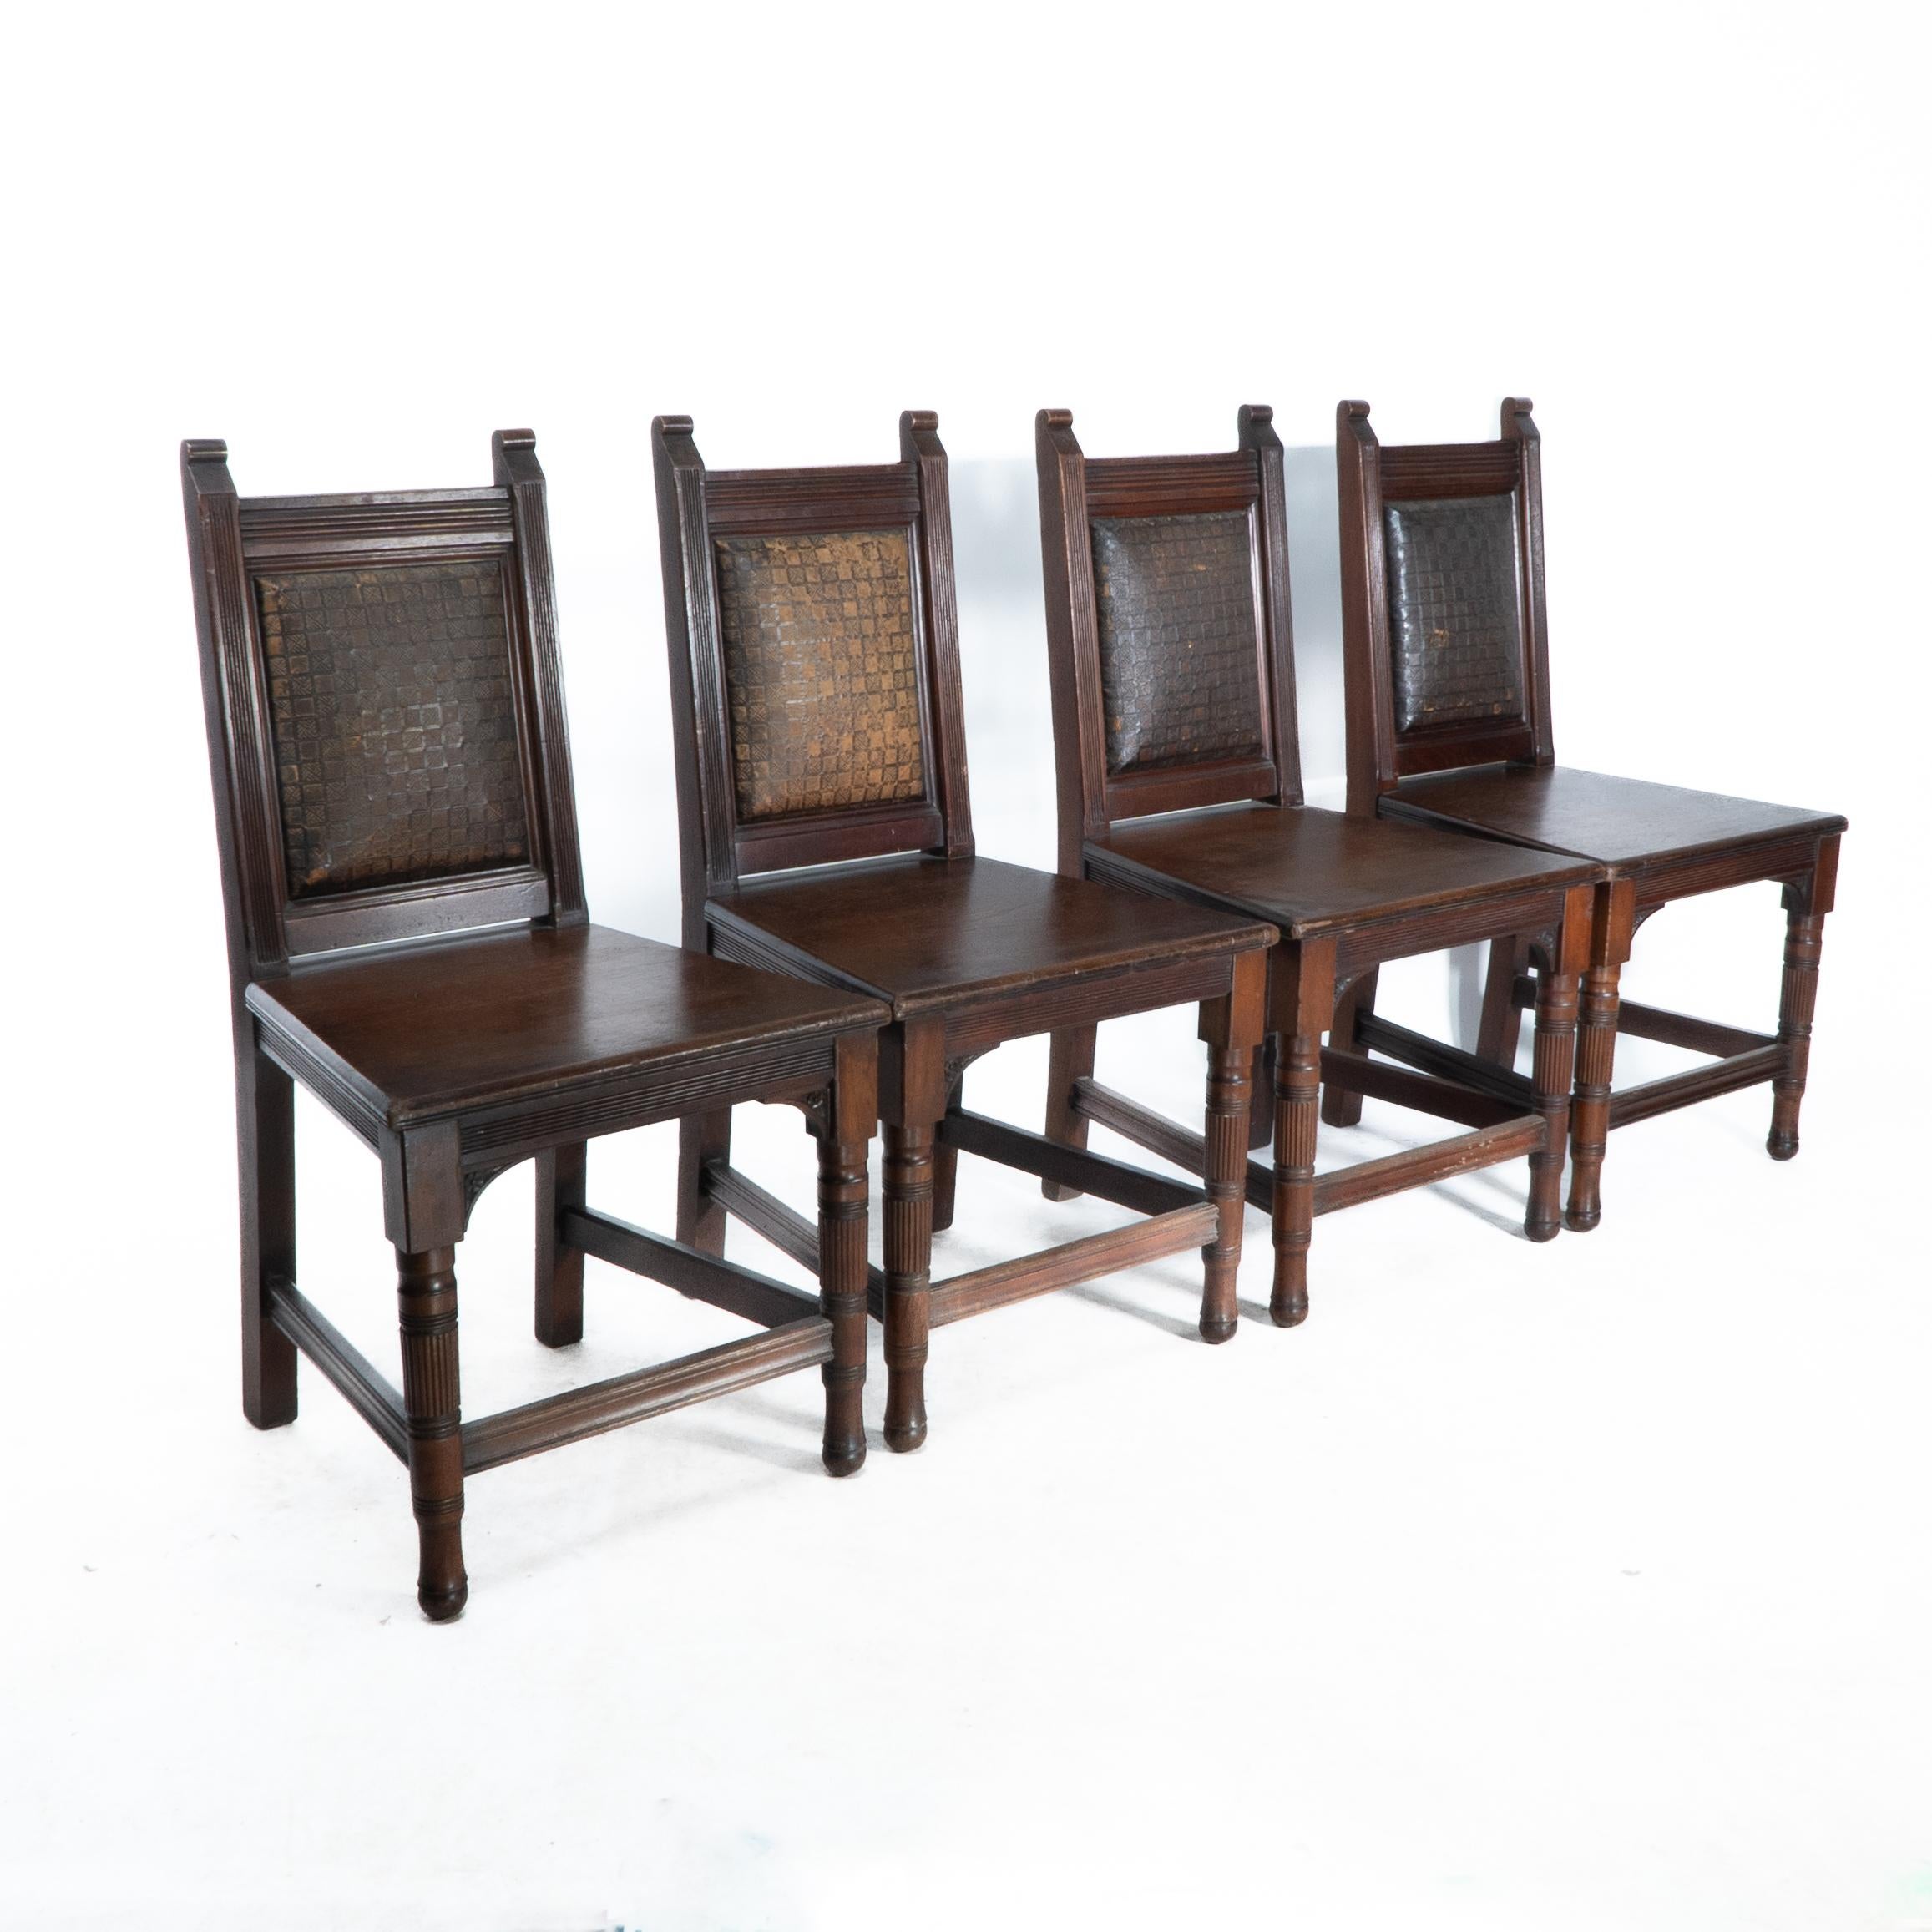 An Aesthetic Movement set of four walnut and chequer tooled leather hall chairs.
In the manner of Edward William Godwin. 
The embossed leather represents Japanese style basket weave a motif used by Godwin a number of times.
Price for the set